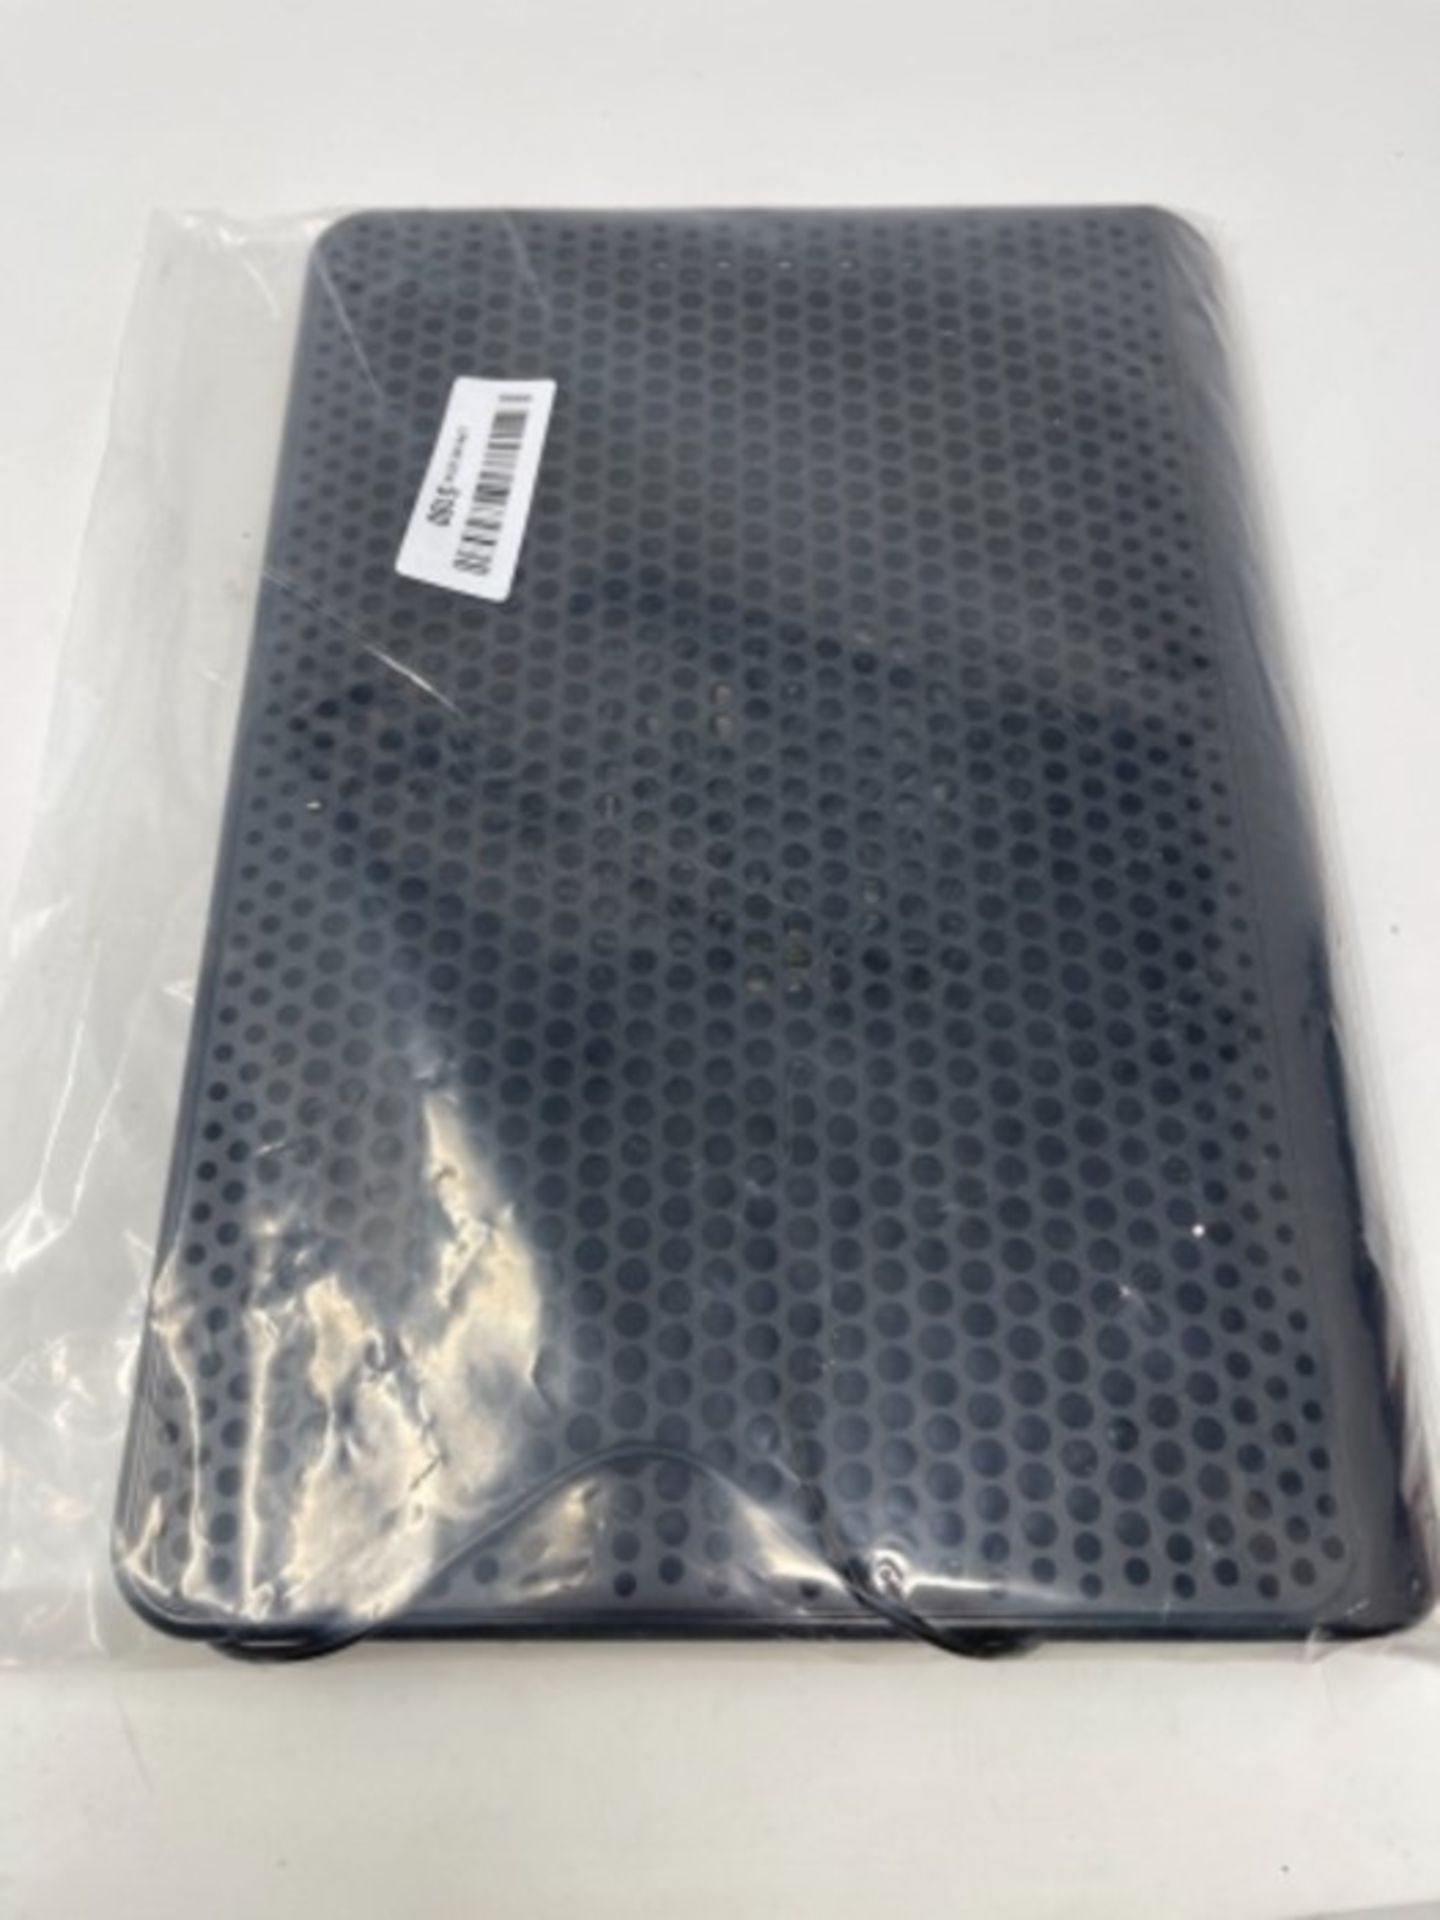 Targus Chill Mat Ultraslim Quiet and Portable Cooling Pad for Laptop, Black (AWE69EU) - Image 2 of 4